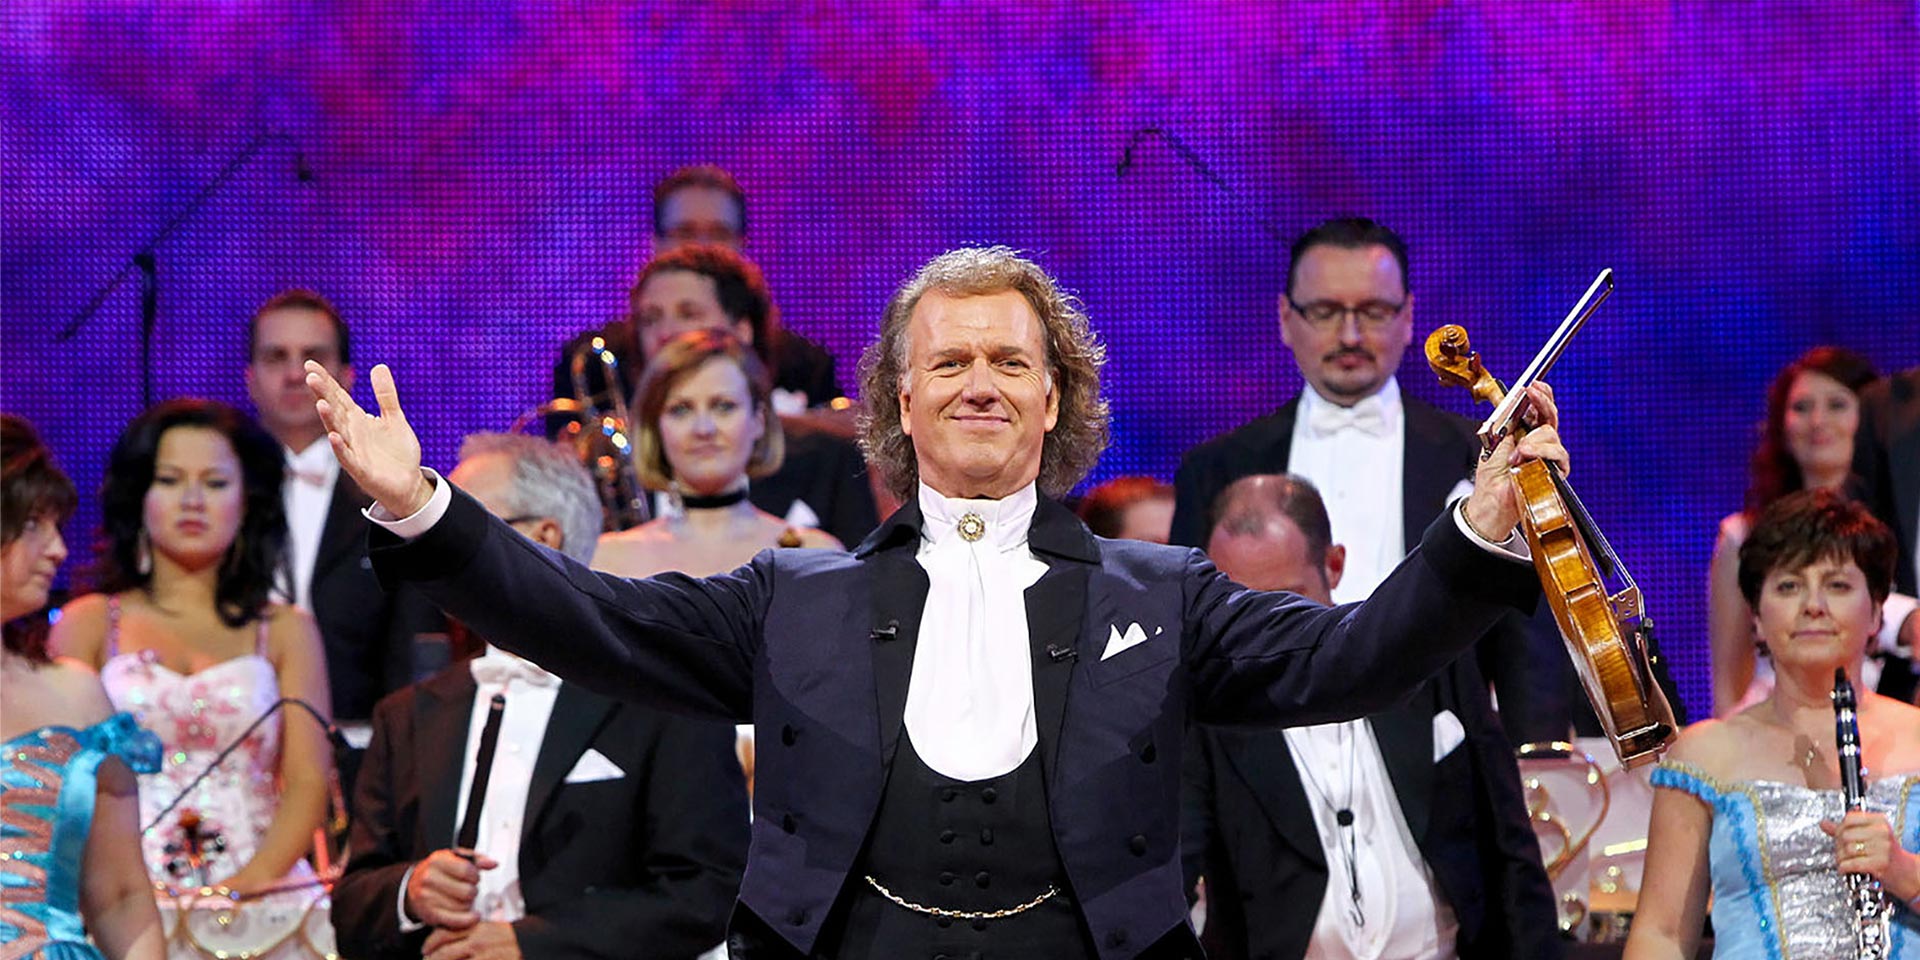 tourhub | Just Go Holidays | André Rieu & his Johann Strauss Orchestra – Live at Wembley Arena (by Coach) 